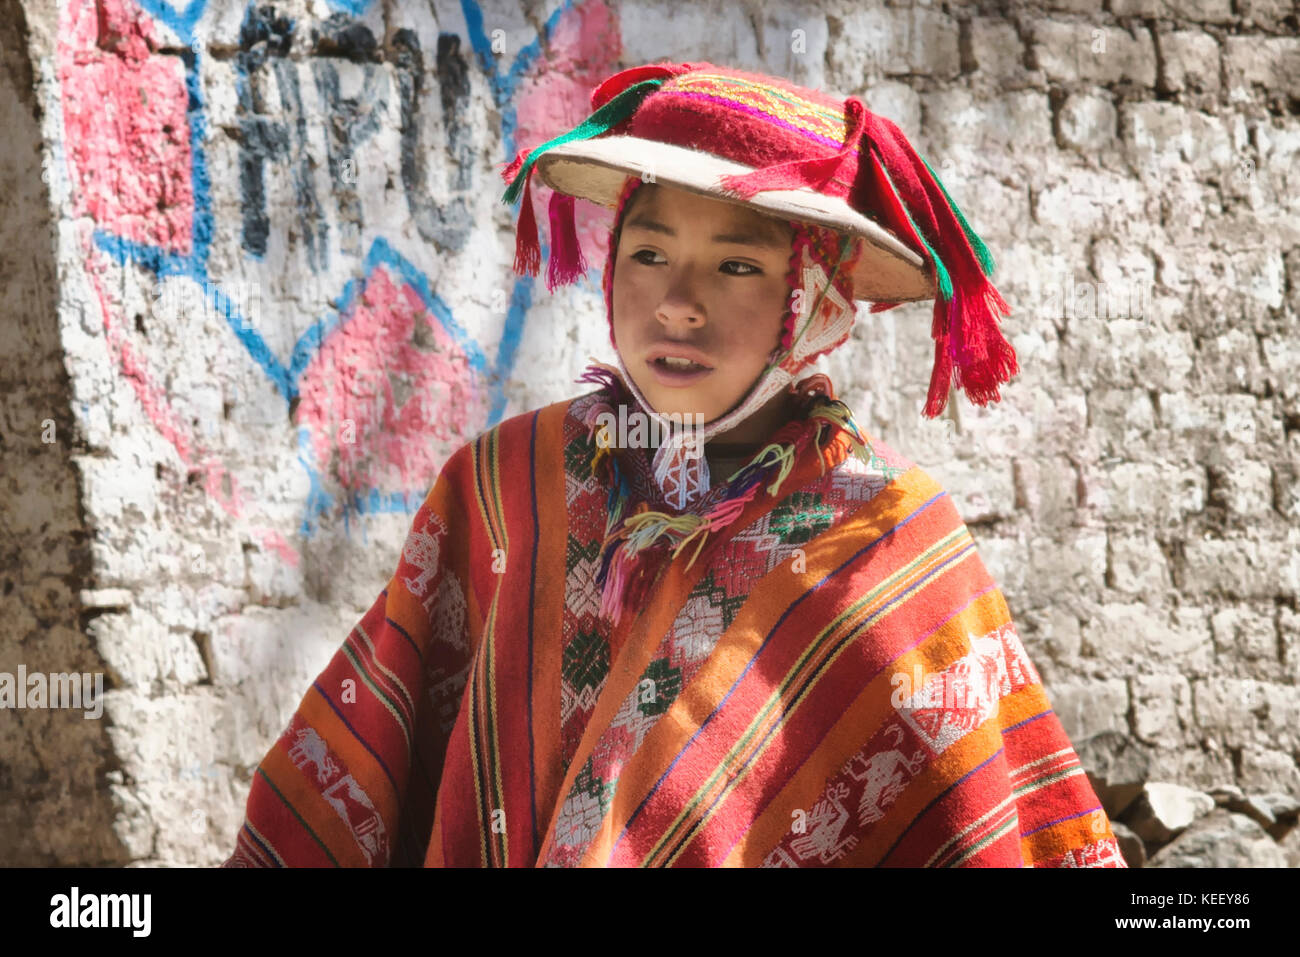 Peruvian boy dressed in colourful traditional handmade outfit. October 21, 2012 - Patachancha, Cuzco, Peru Stock Photo